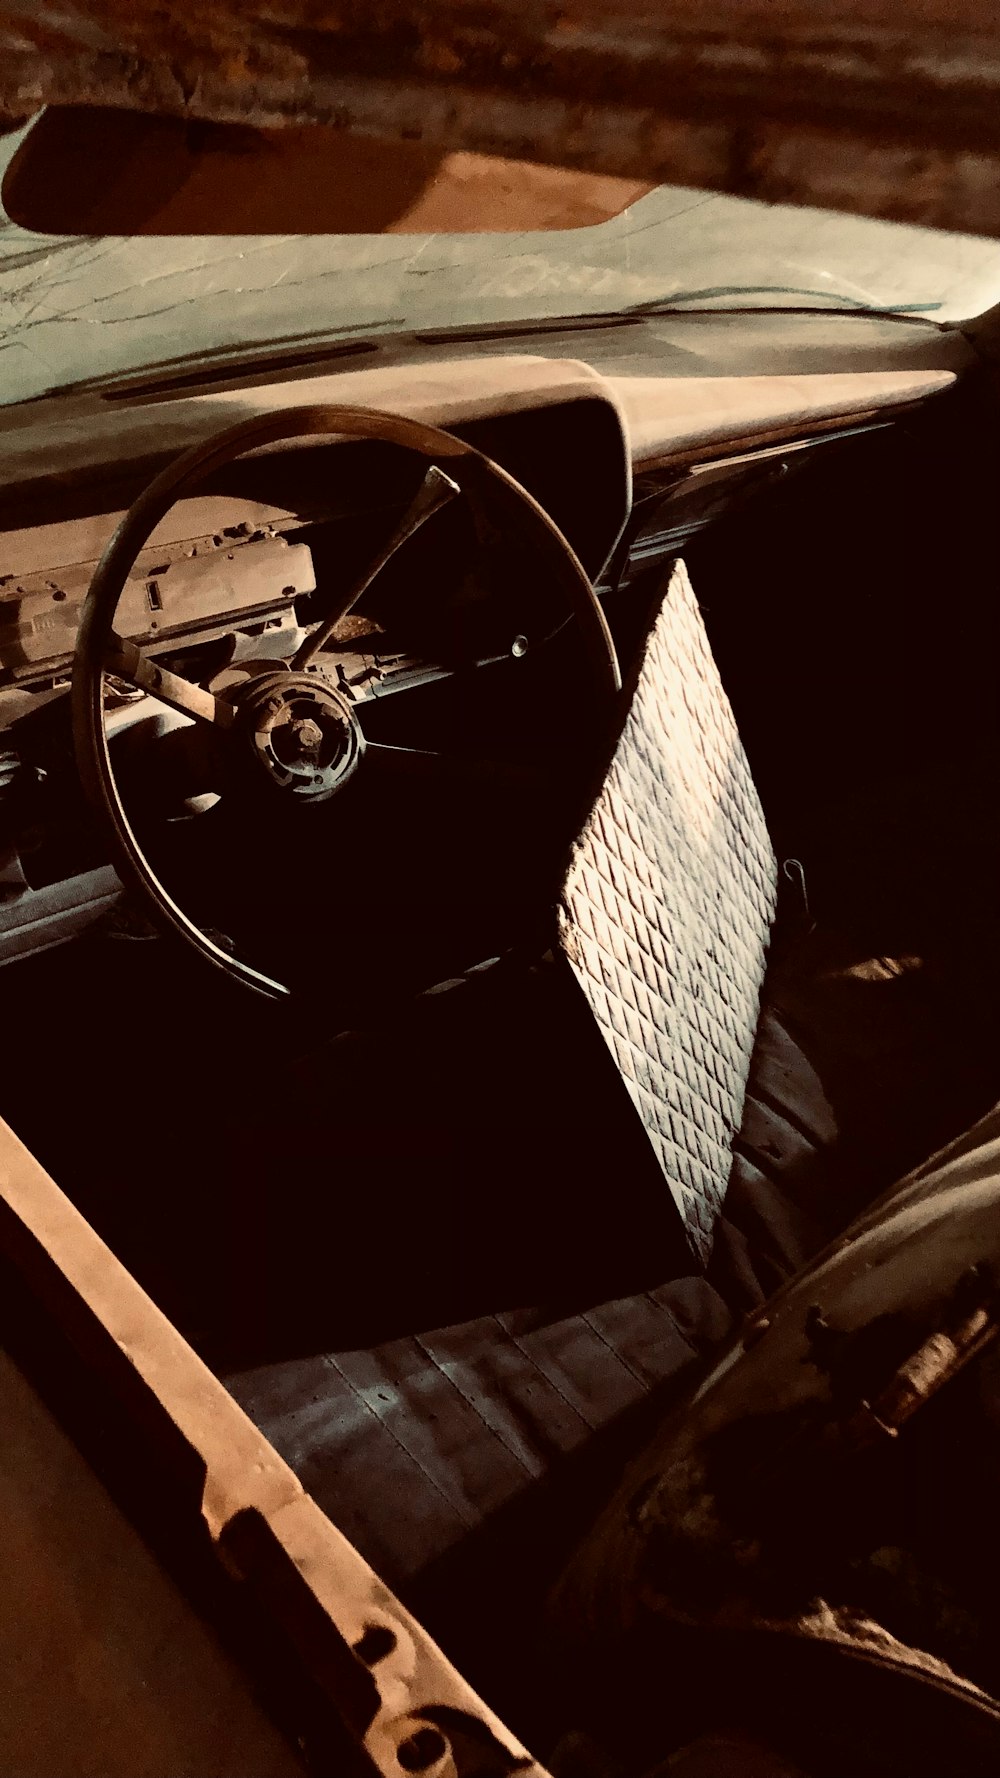 the interior of an old car with a steering wheel